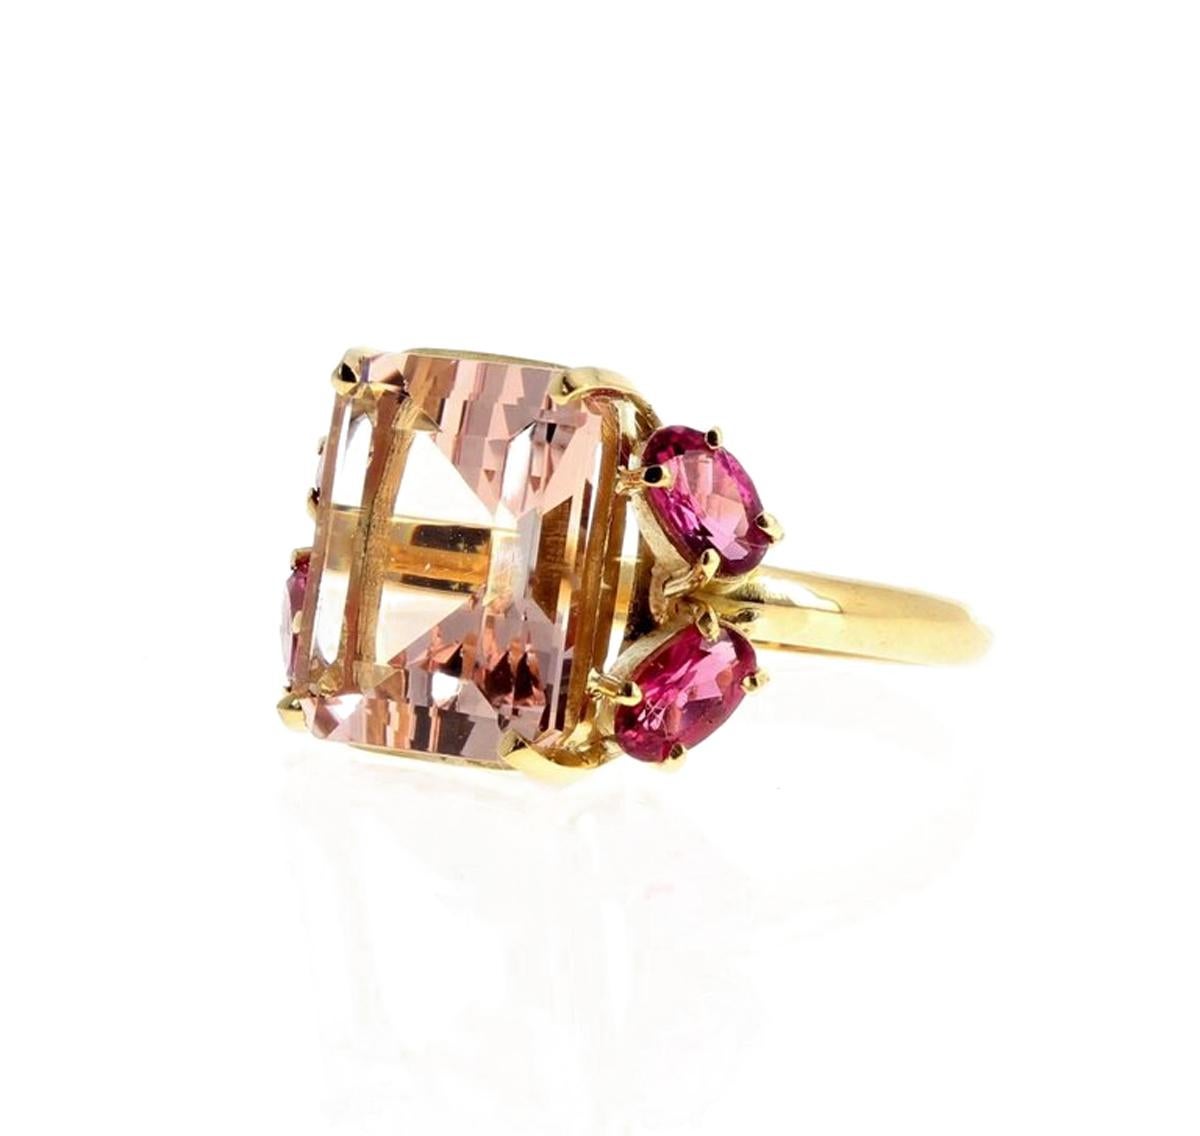 Women's AJD GORGEOUS 4.5Ct Pink Morganite & Pink Tourmaline 18Kt Yellow Gold Ring For Sale